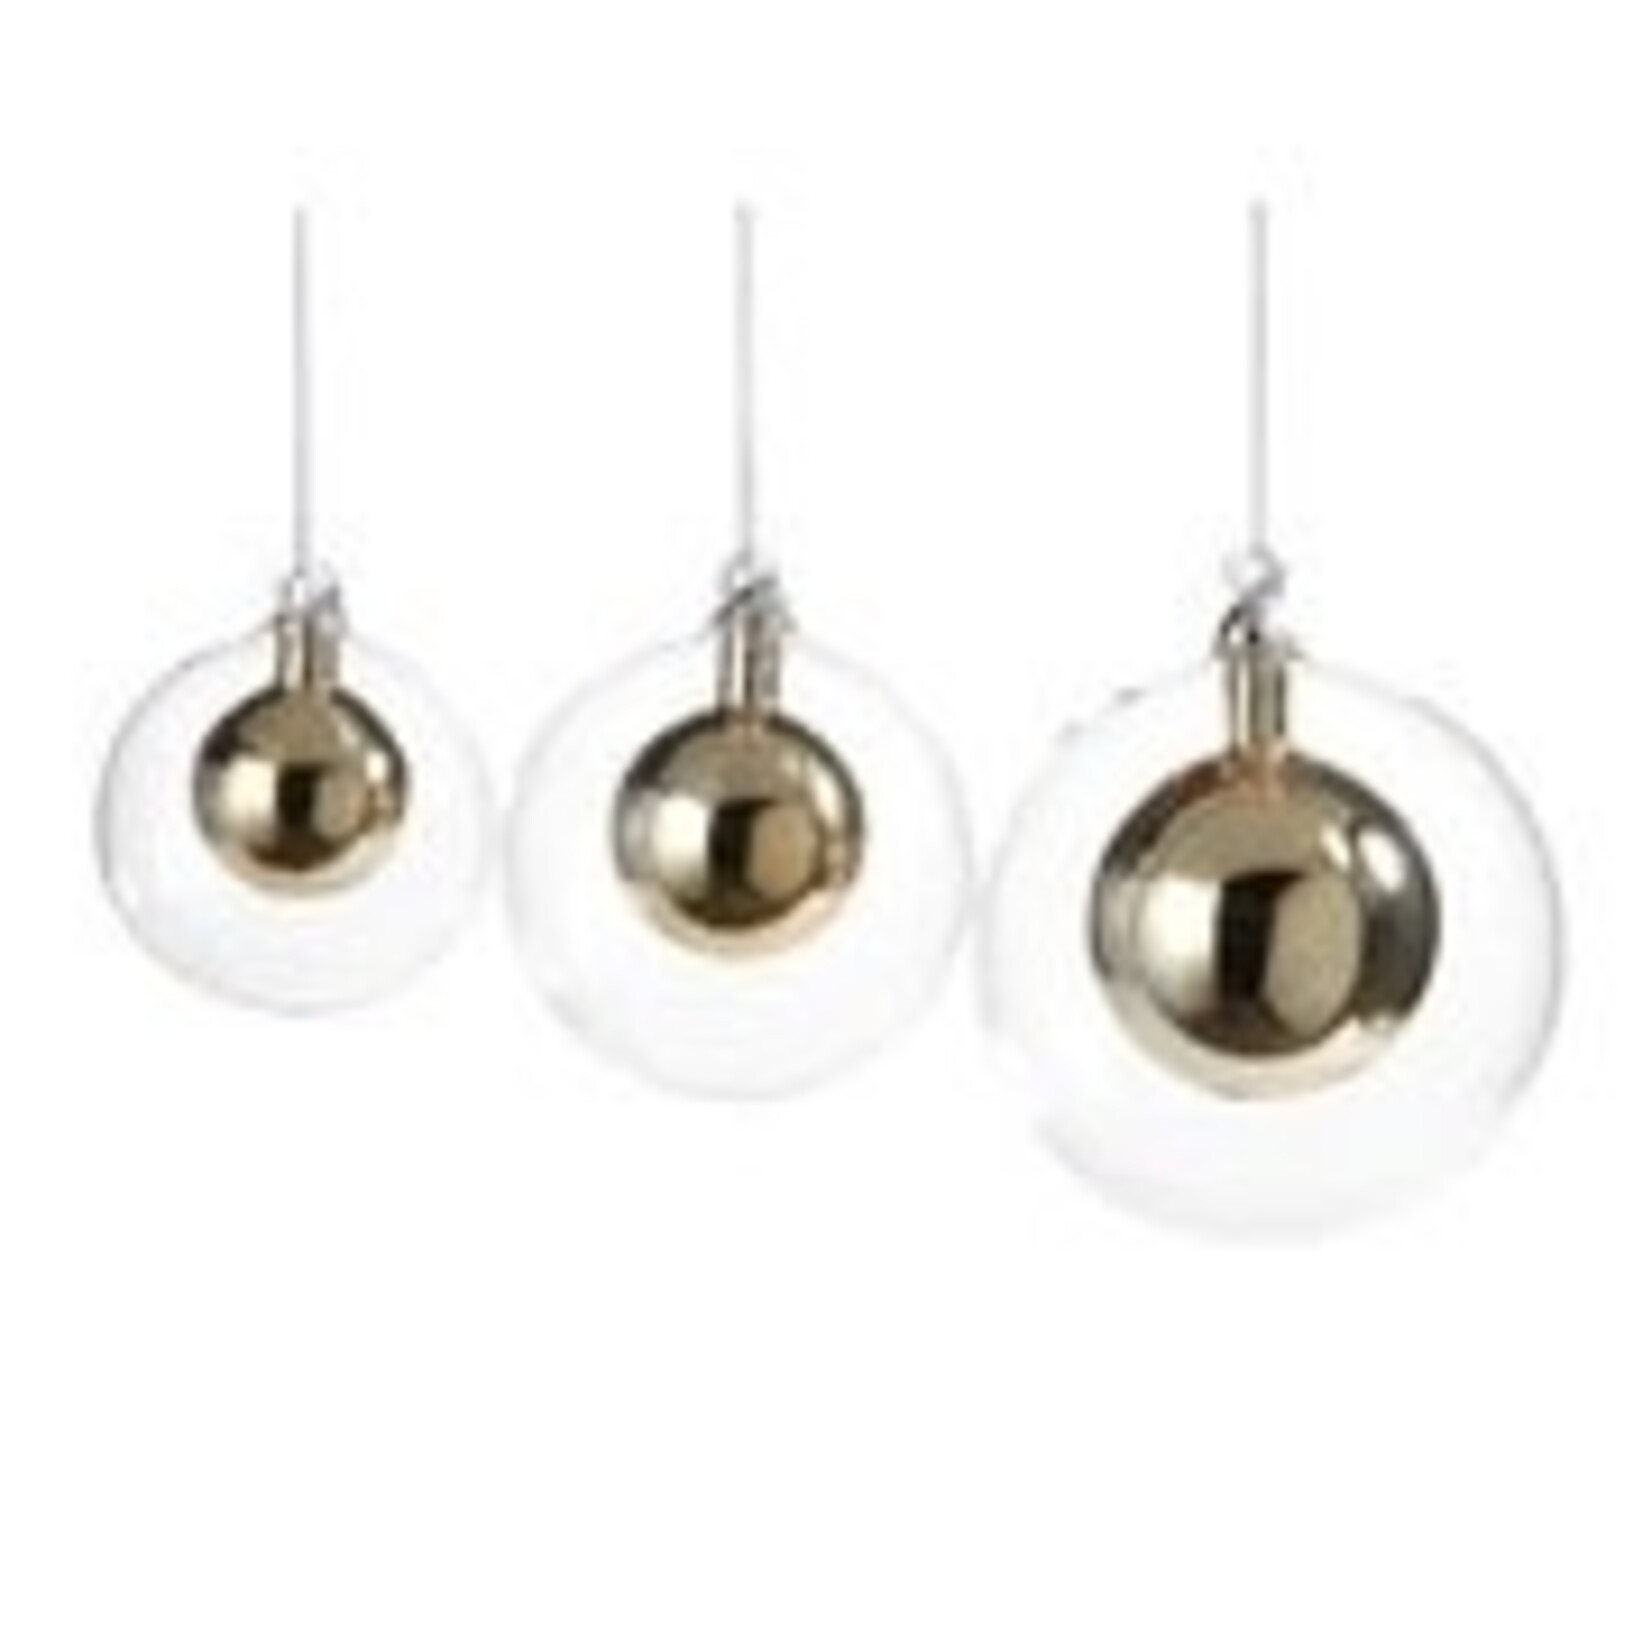 Zodax DOUBLE GLASS BALL ORNAMENT- GOLD/LARGE